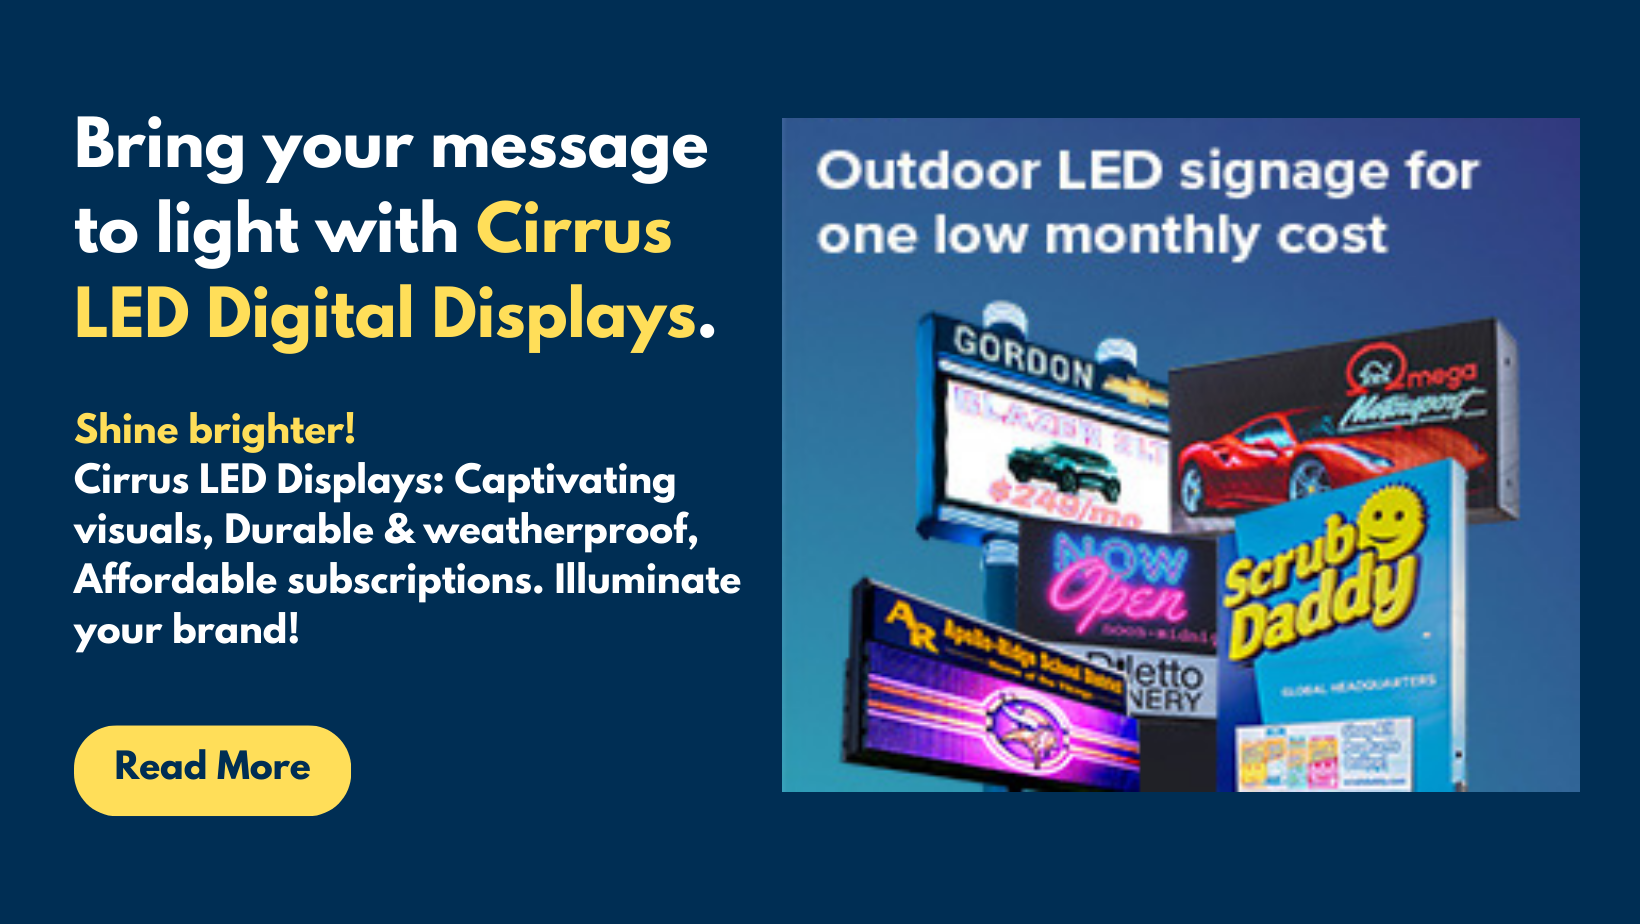 Bring your message to light with Cirrus LED Digital Displays.